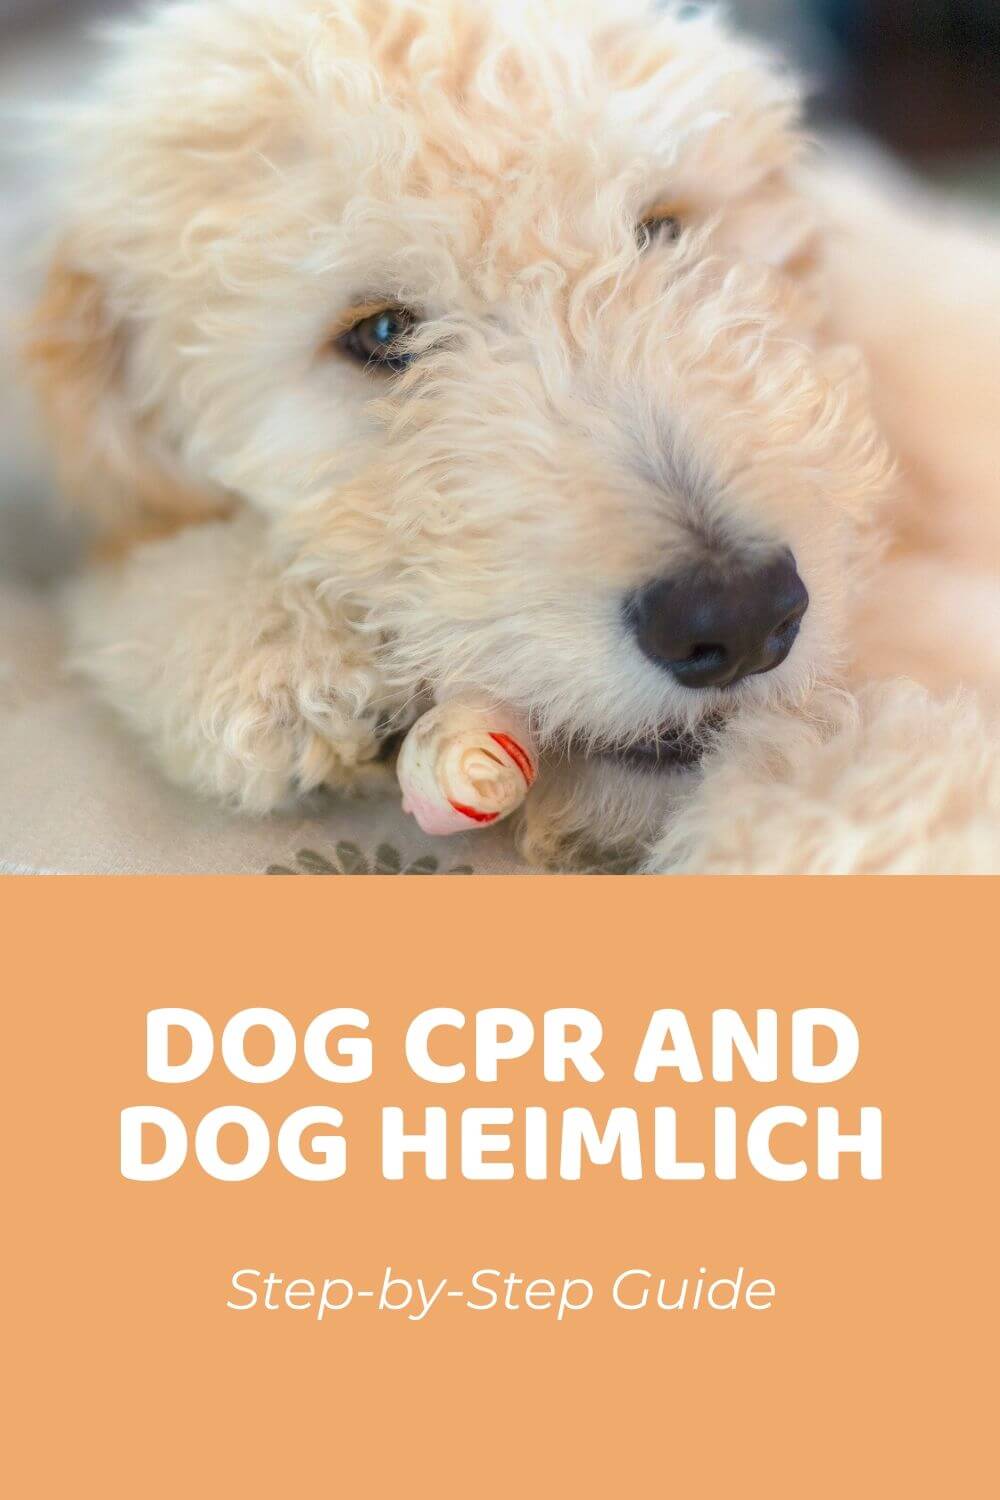 Dog CPR and Dog Heimlich Step-by-Step Guide